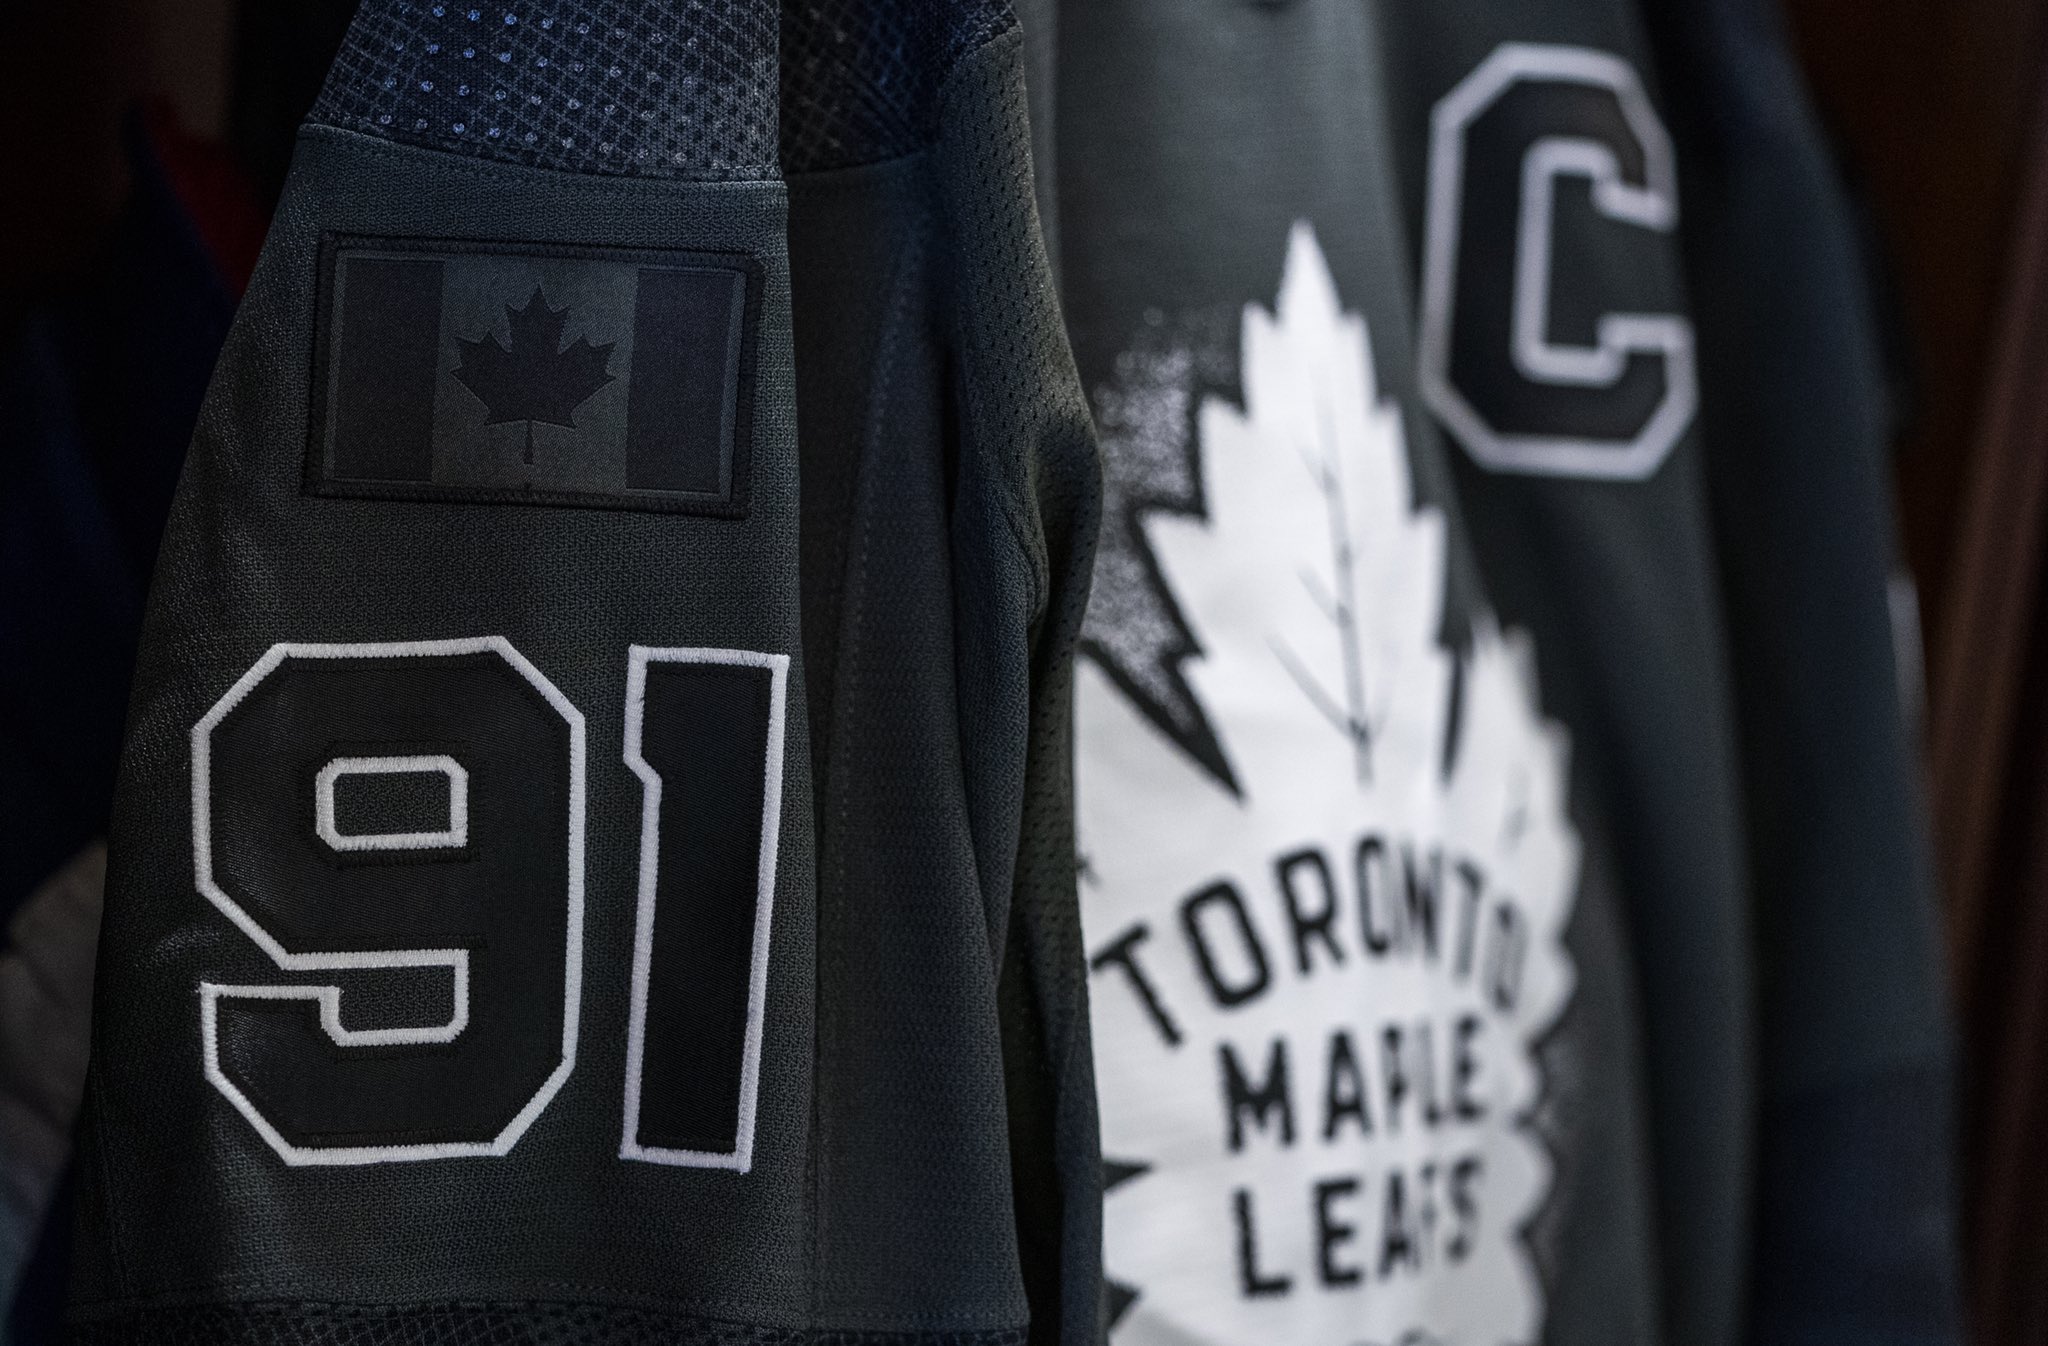 Toronto Maple Leafs on X: We'll be wearing these warmup sweaters